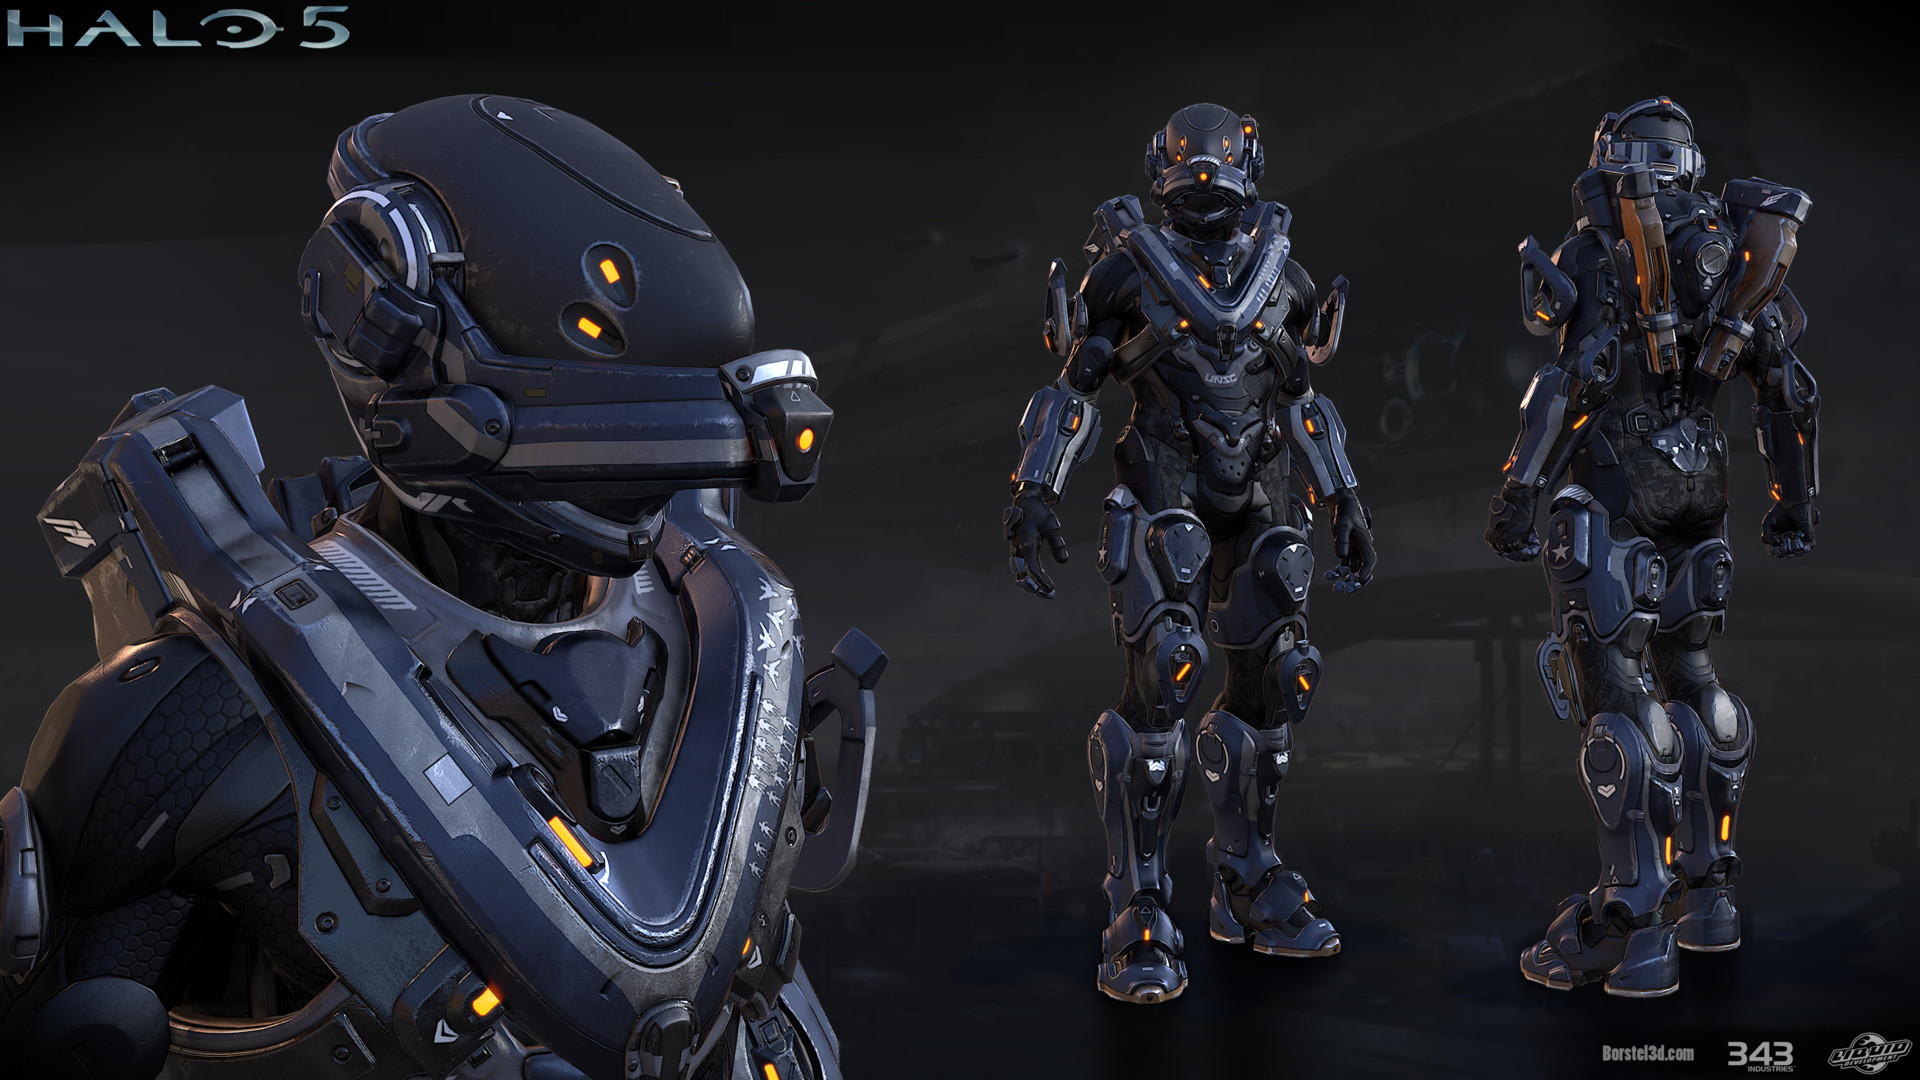 This is the Mako armor set that I made for Halo 5